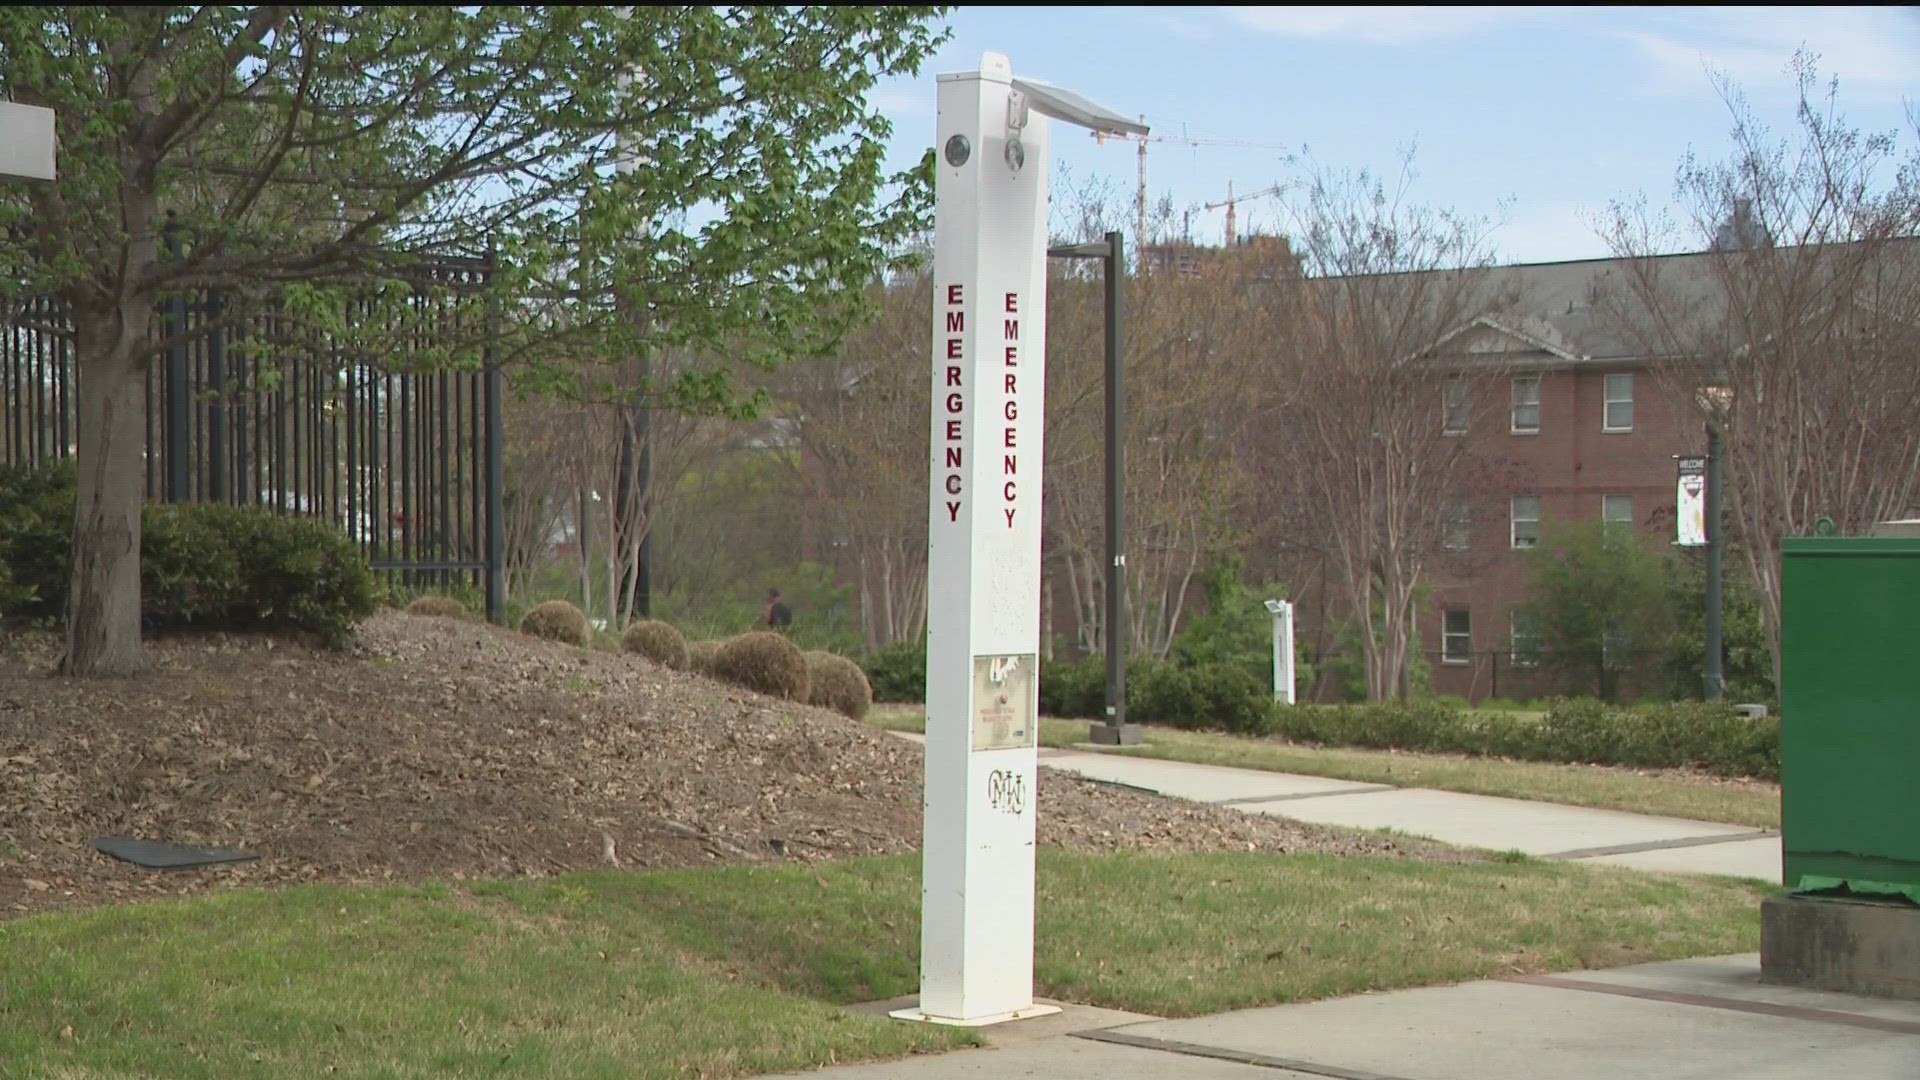 Students expressed growing concerns after the shooting of a Clark Atlanta University Student in February.